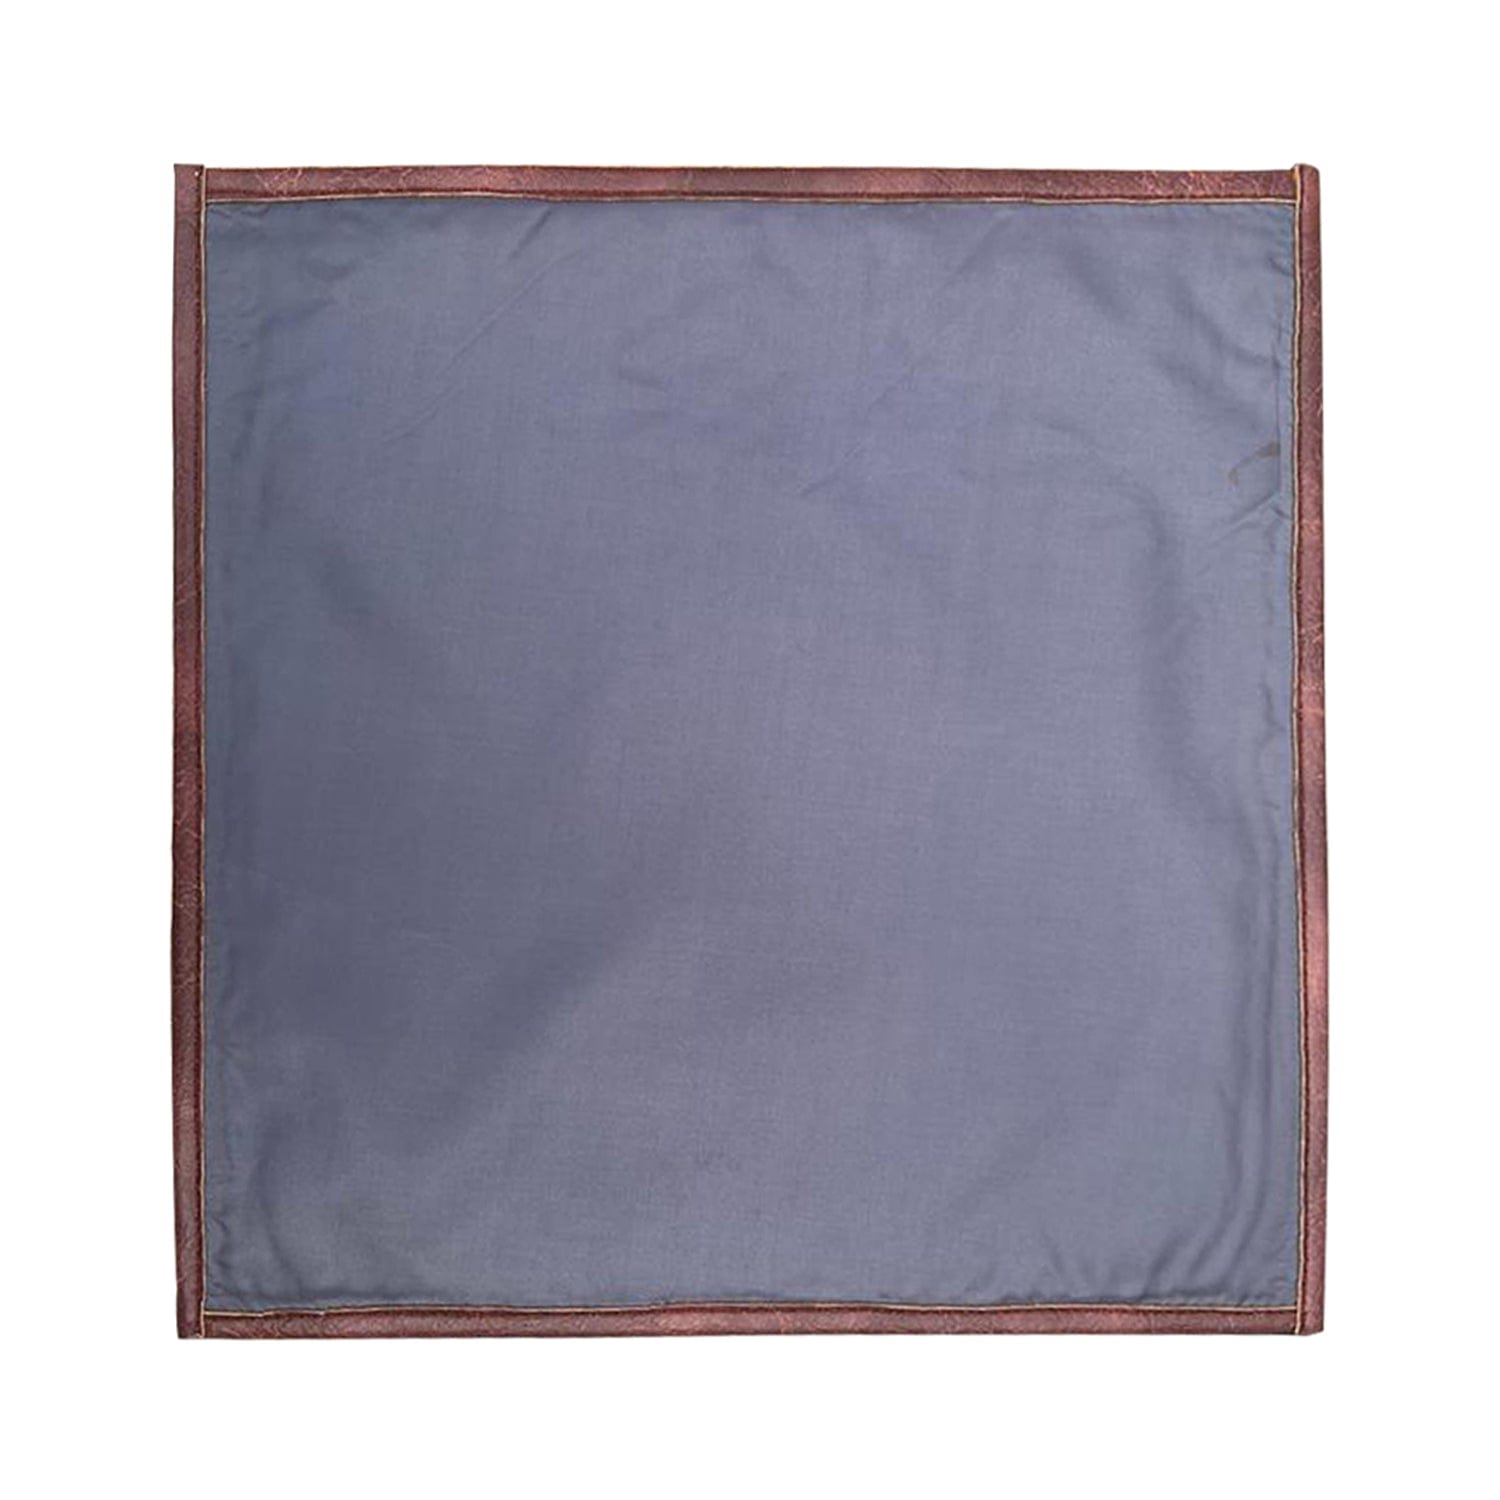 Mona B Set of 2 Printed Placemats, 13 INCH Square, Best for Bed-Side Table/Center Table, Dining Table/Shelves- PP-102 - Placemat by Mona-B - Backpack, Flat30, New Arrivals, Sale, Shop1999, Shop2999, Shop3999